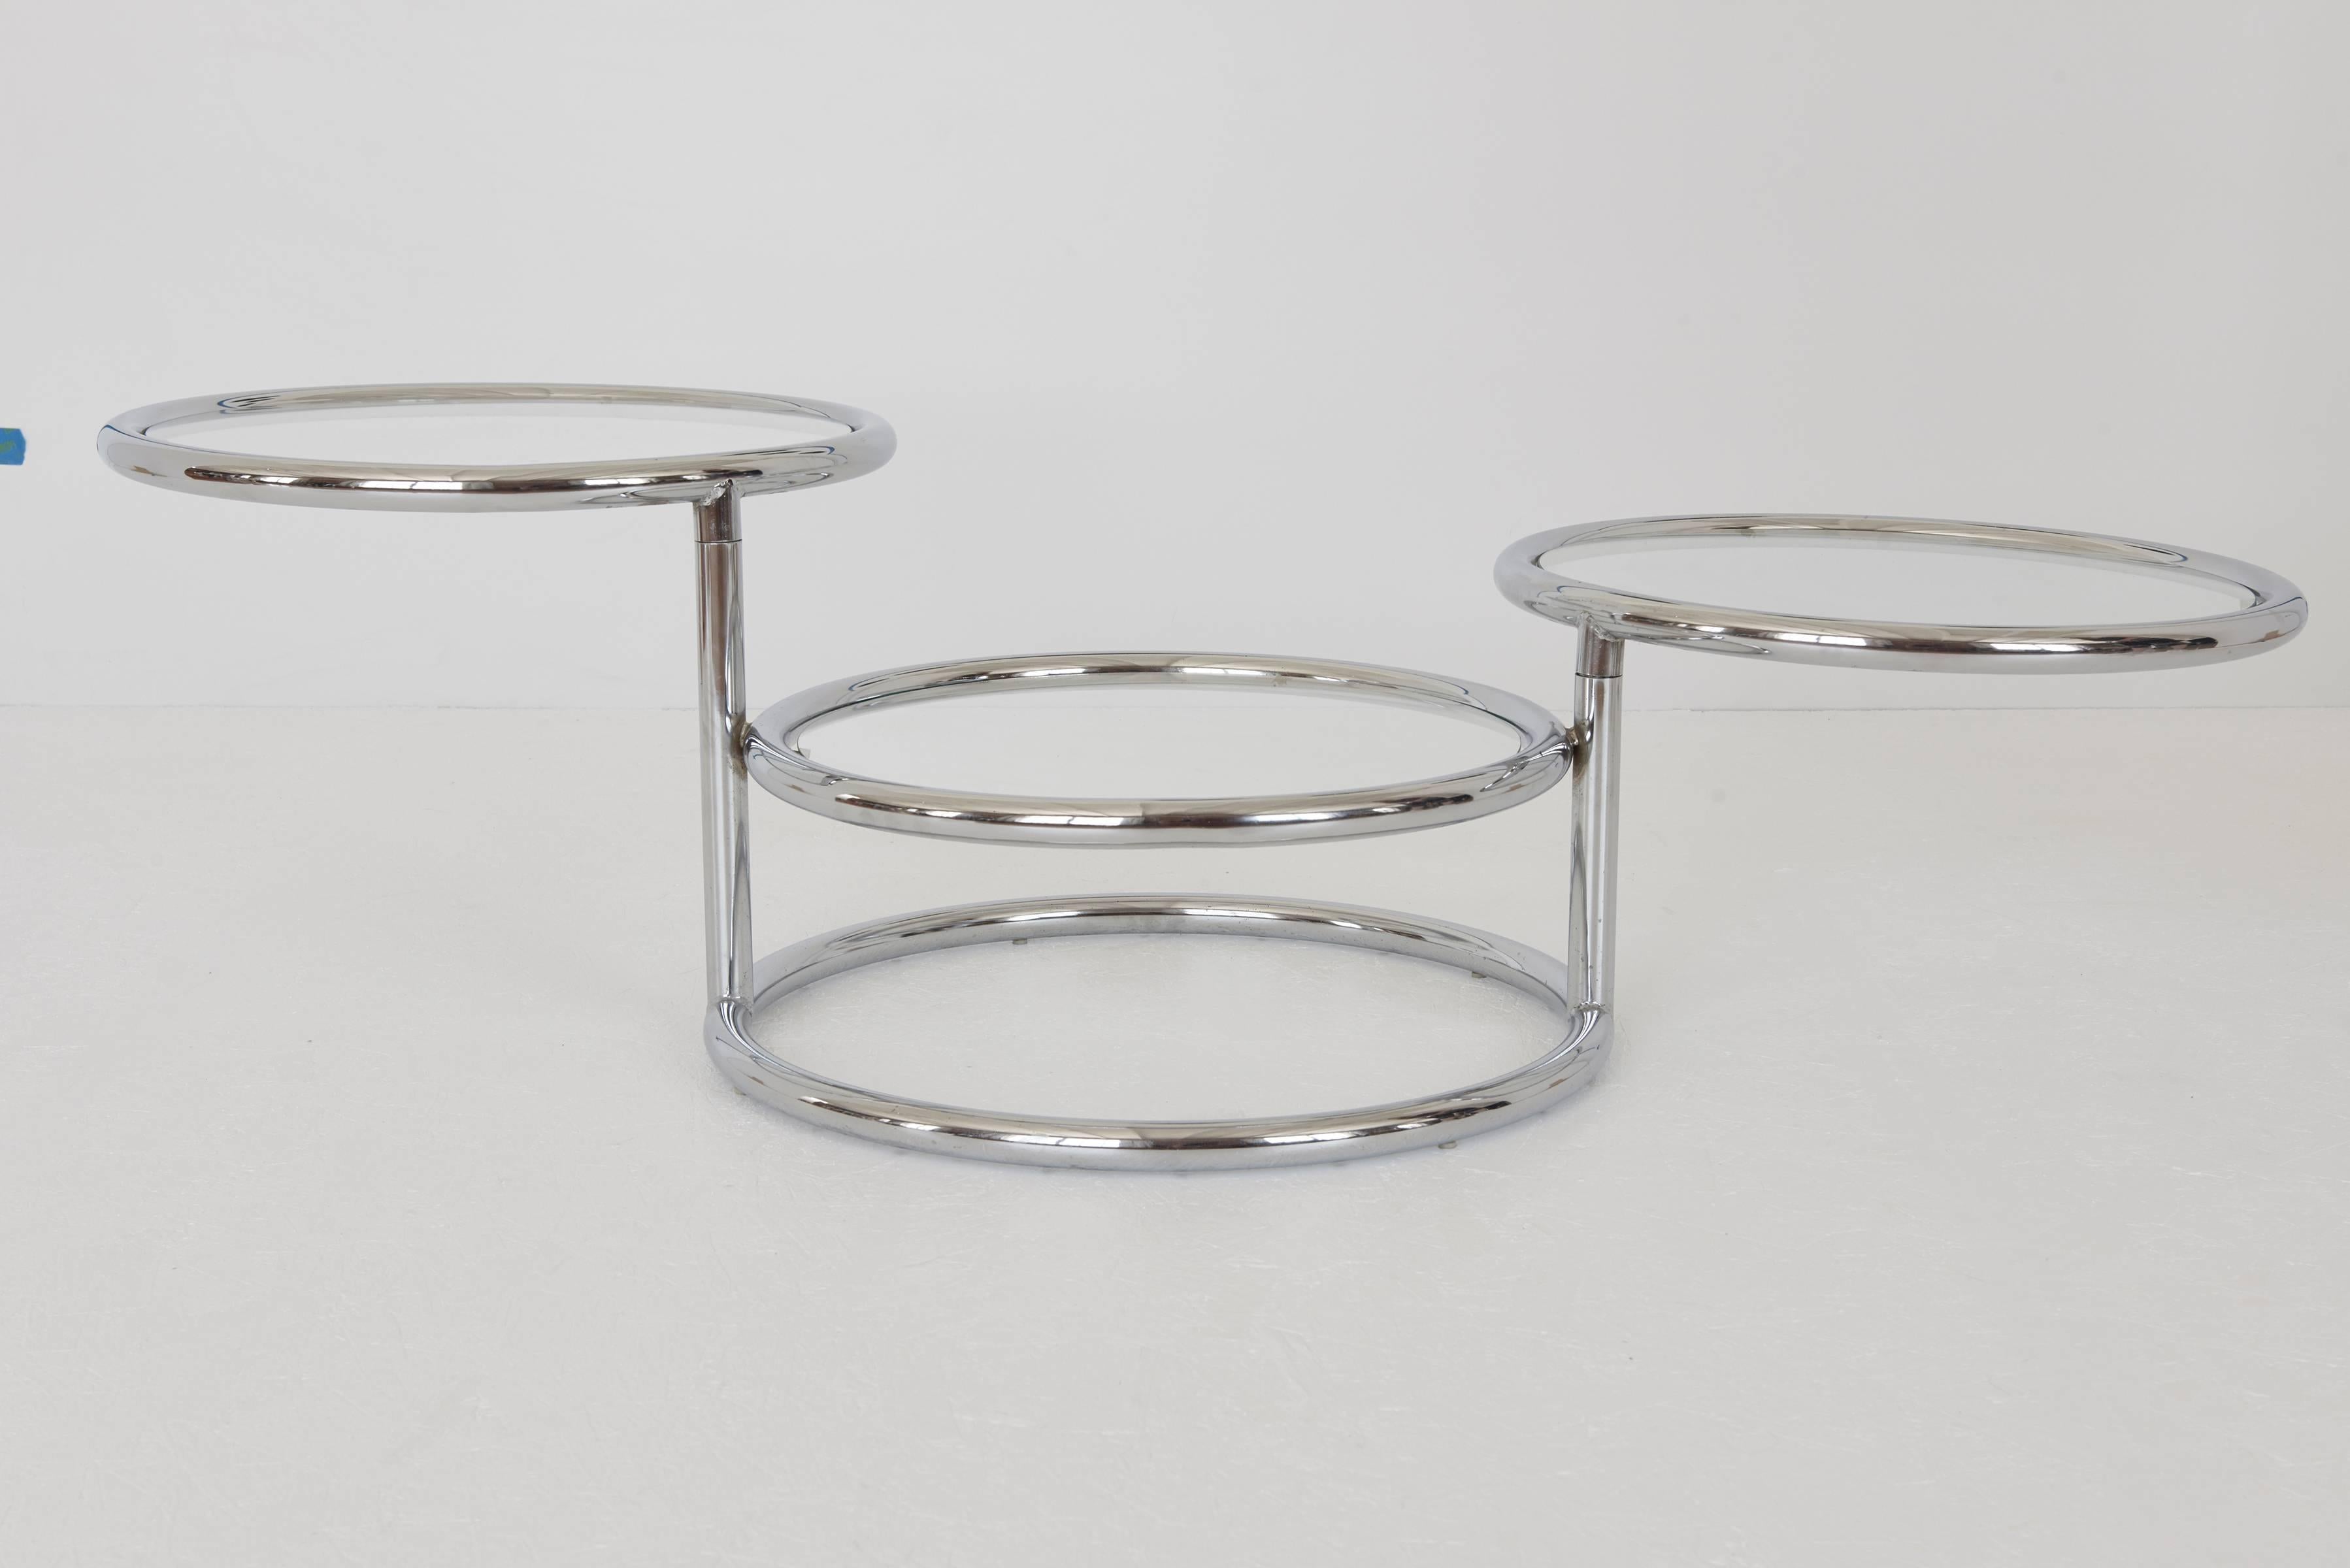 Late 20th Century Adjustable Circular Coffee Table Attributed to Milo Baughman, 1970s